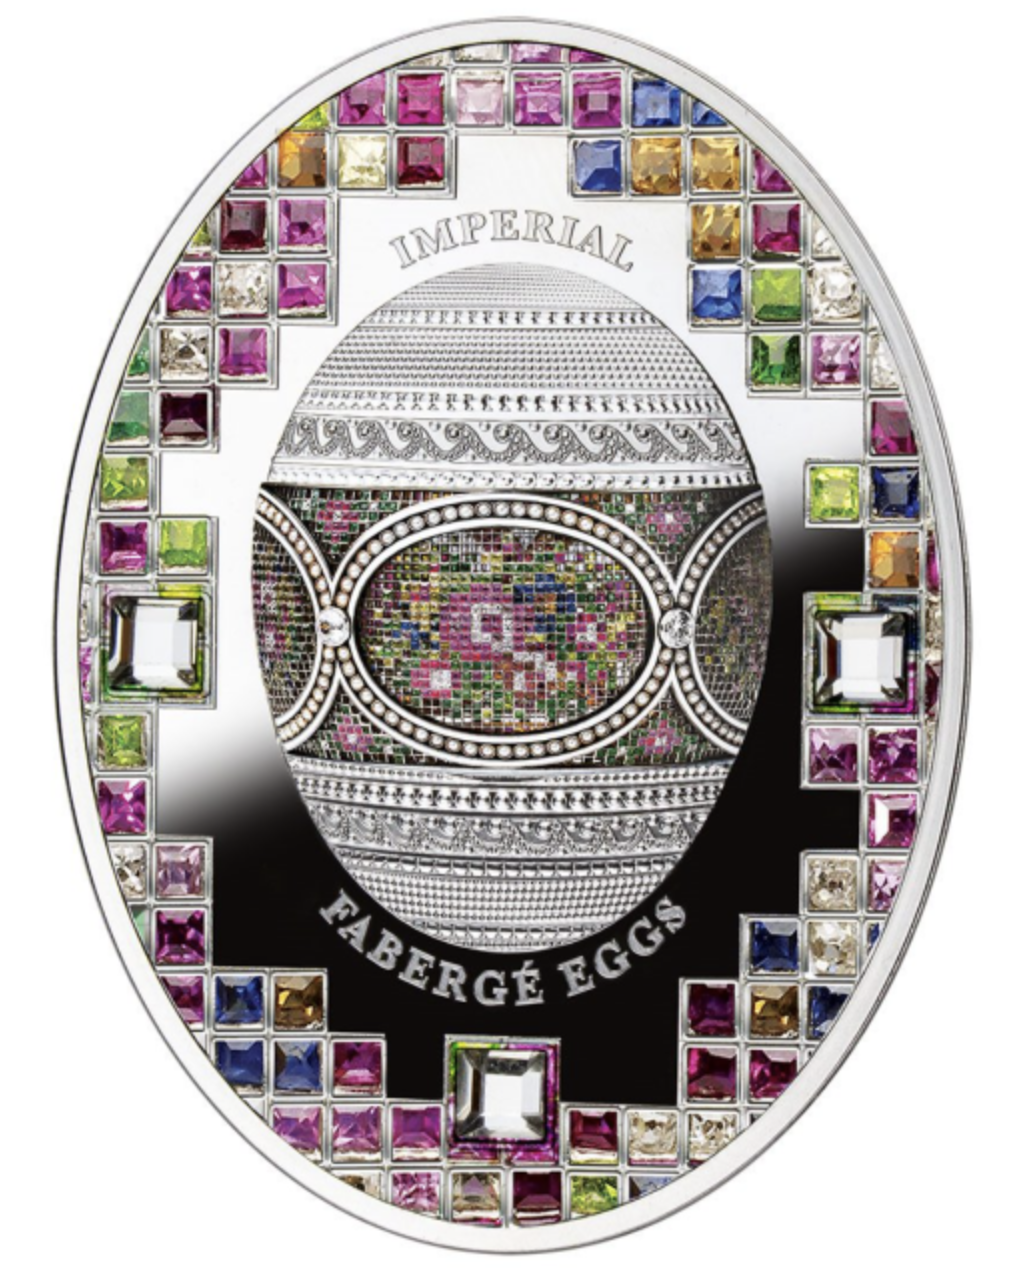 2021 Faberge Eggs - Mosaic Egg Silver Proof Coin